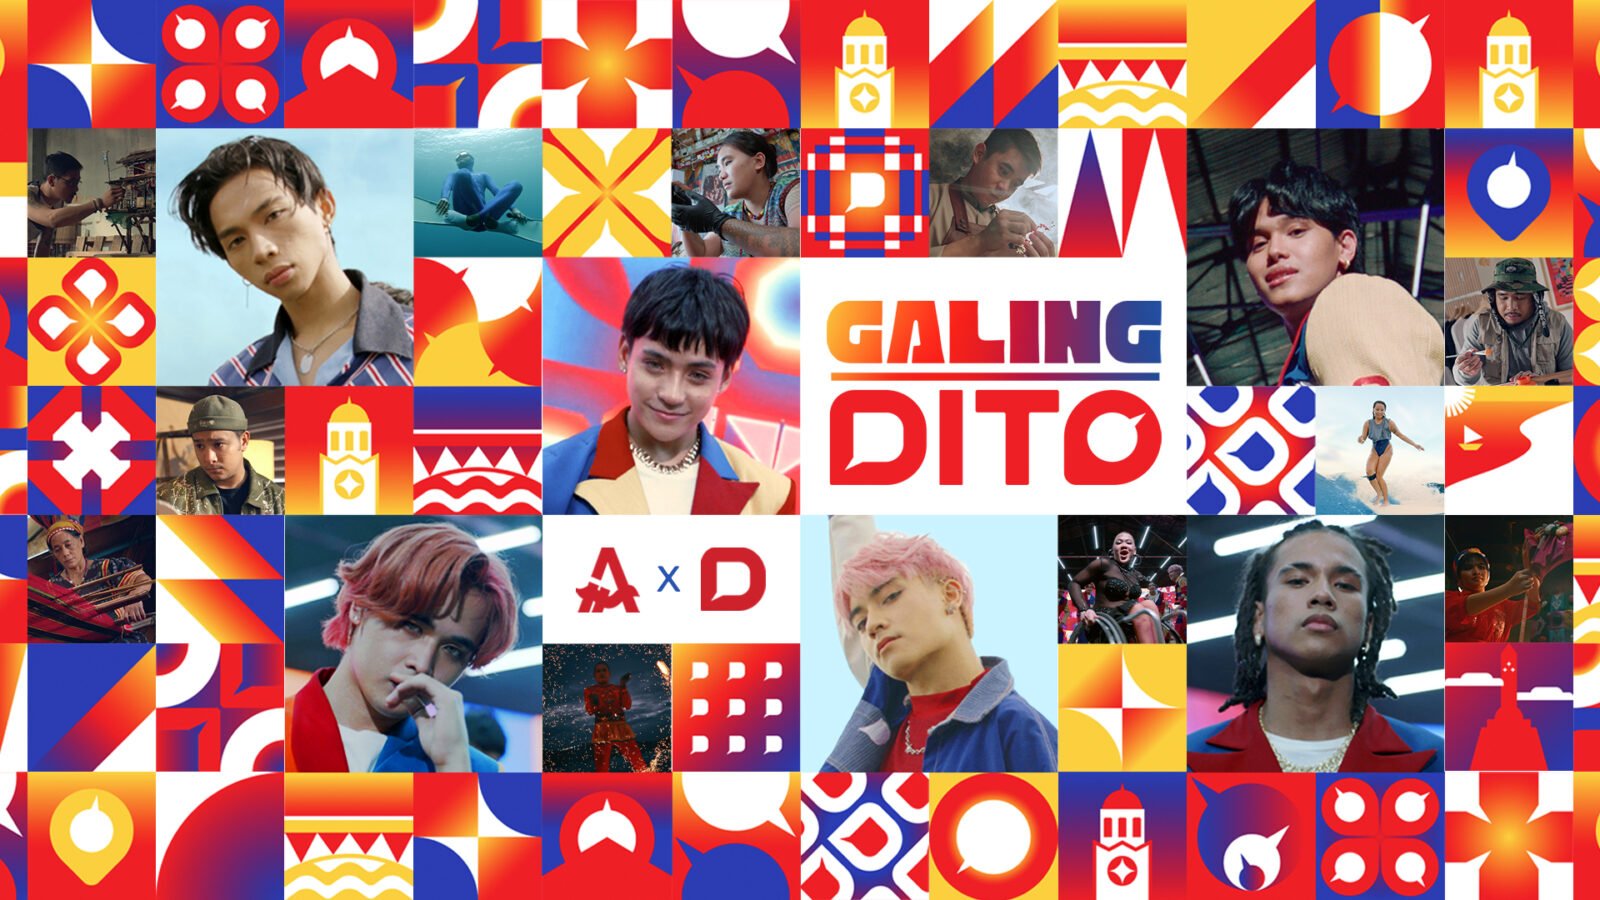 DITO celebrates diverse talents and culture with “Galing DITO” campaign